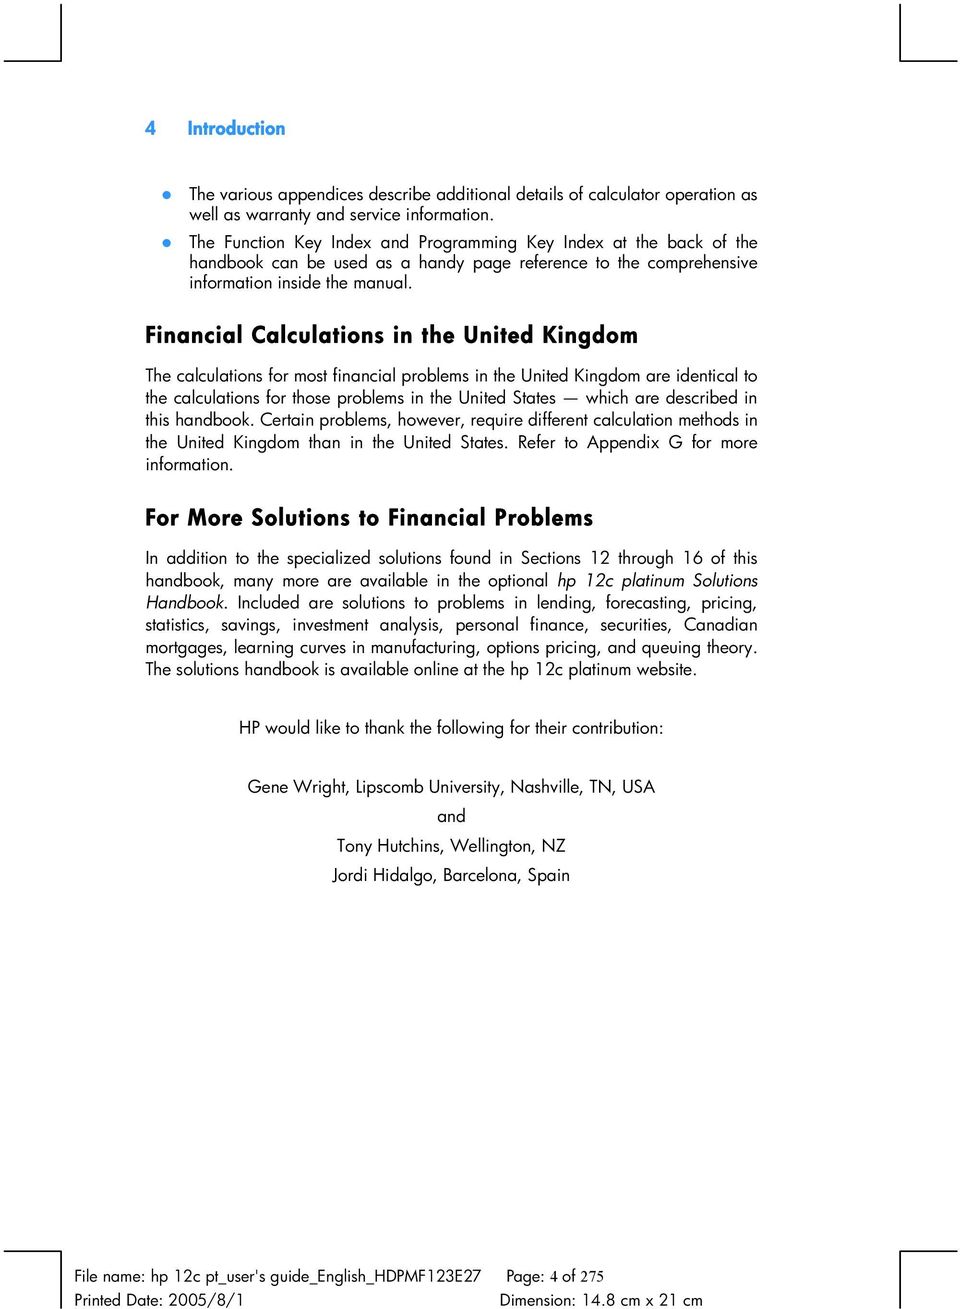 Financial Calculations in the United Kingdom The calculations for most financial problems in the United Kingdom are identical to the calculations for those problems in the United States which are